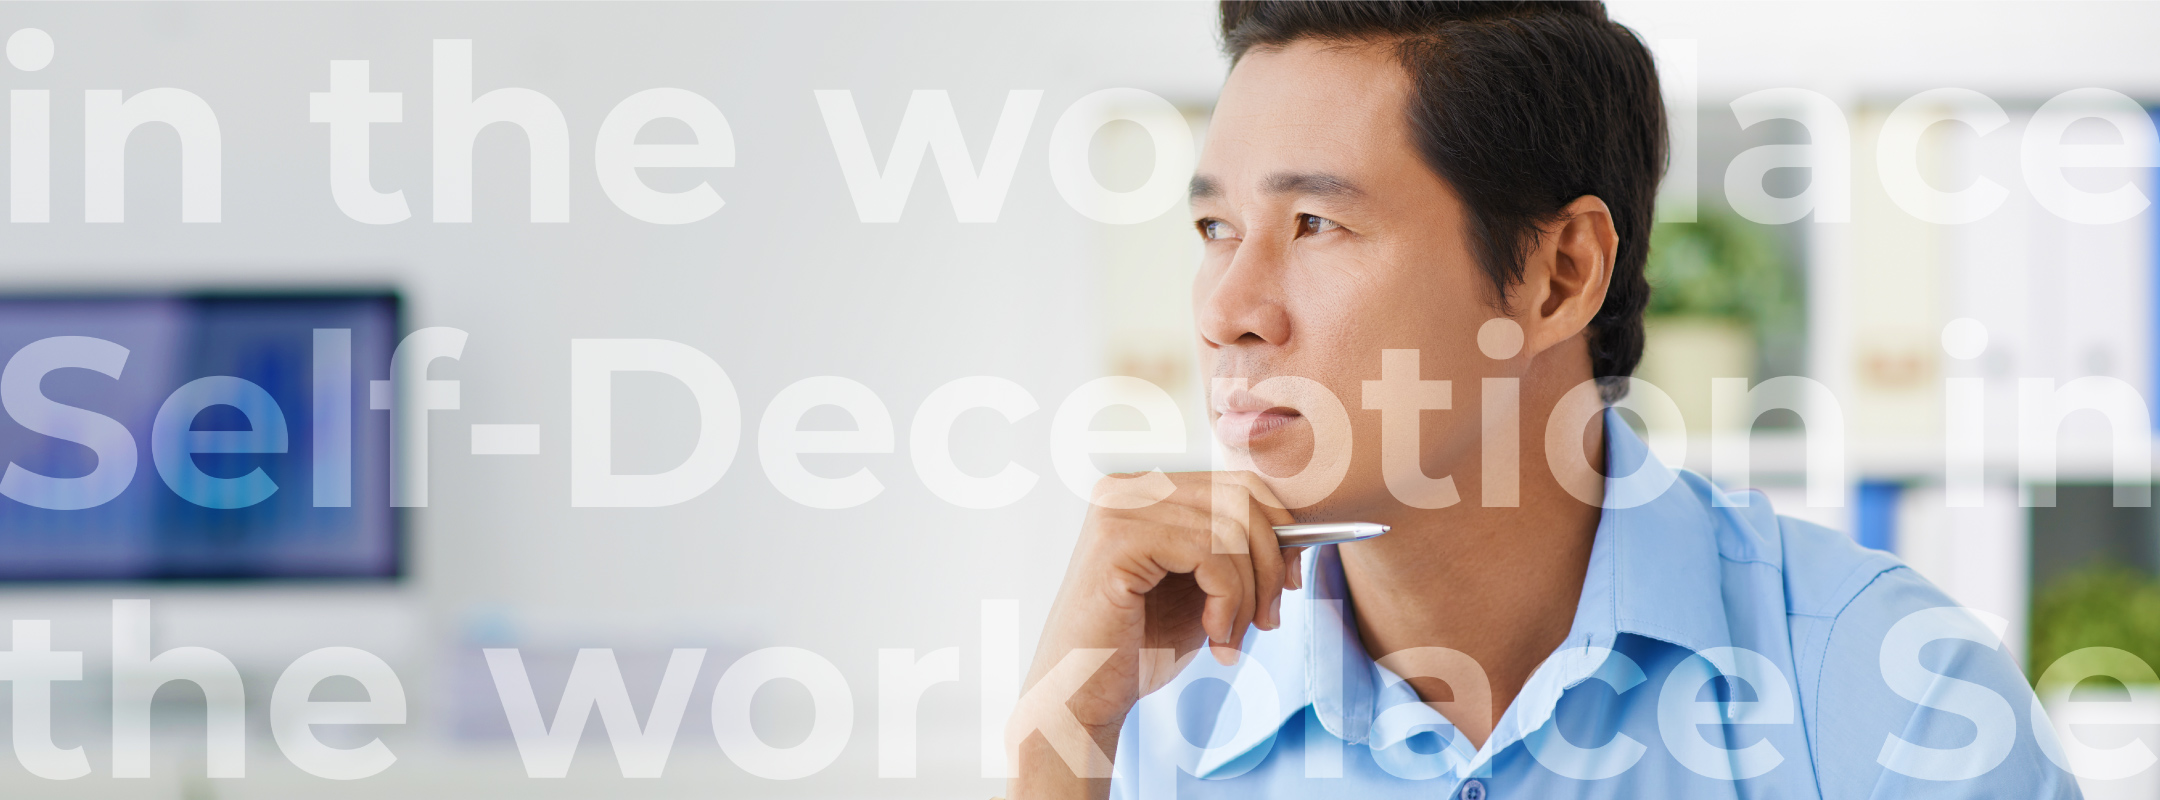 5 self-deception examples in the workplace